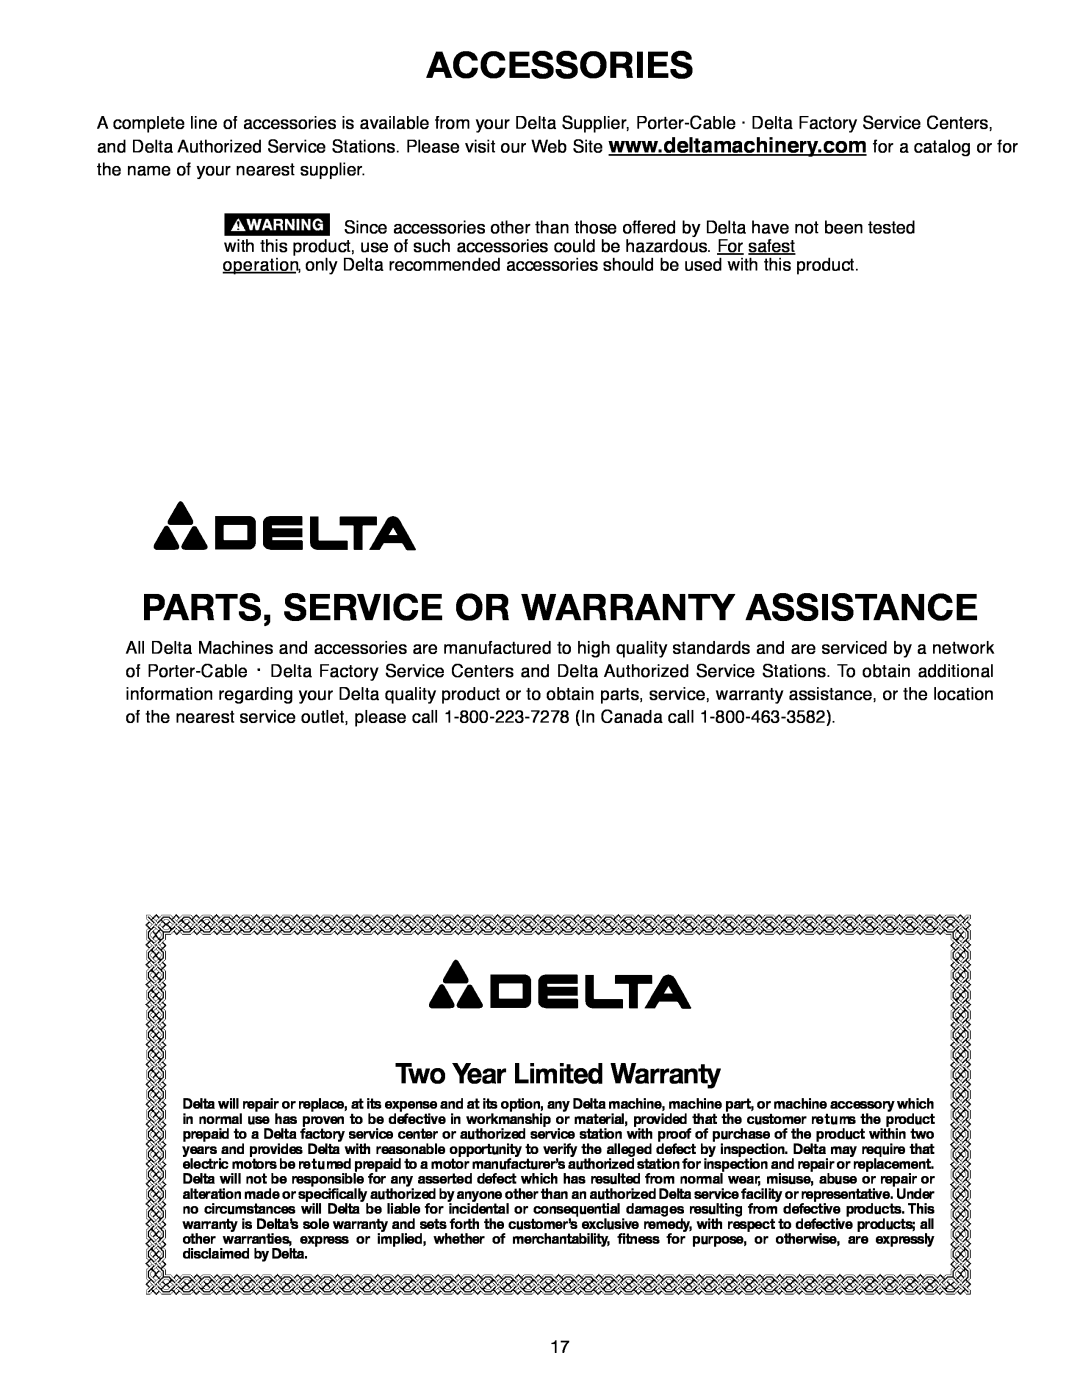 Delta 638517-00, SM300 warranty Accessories, Parts, Service Or Warranty Assistance, Two Year Limited Warranty 